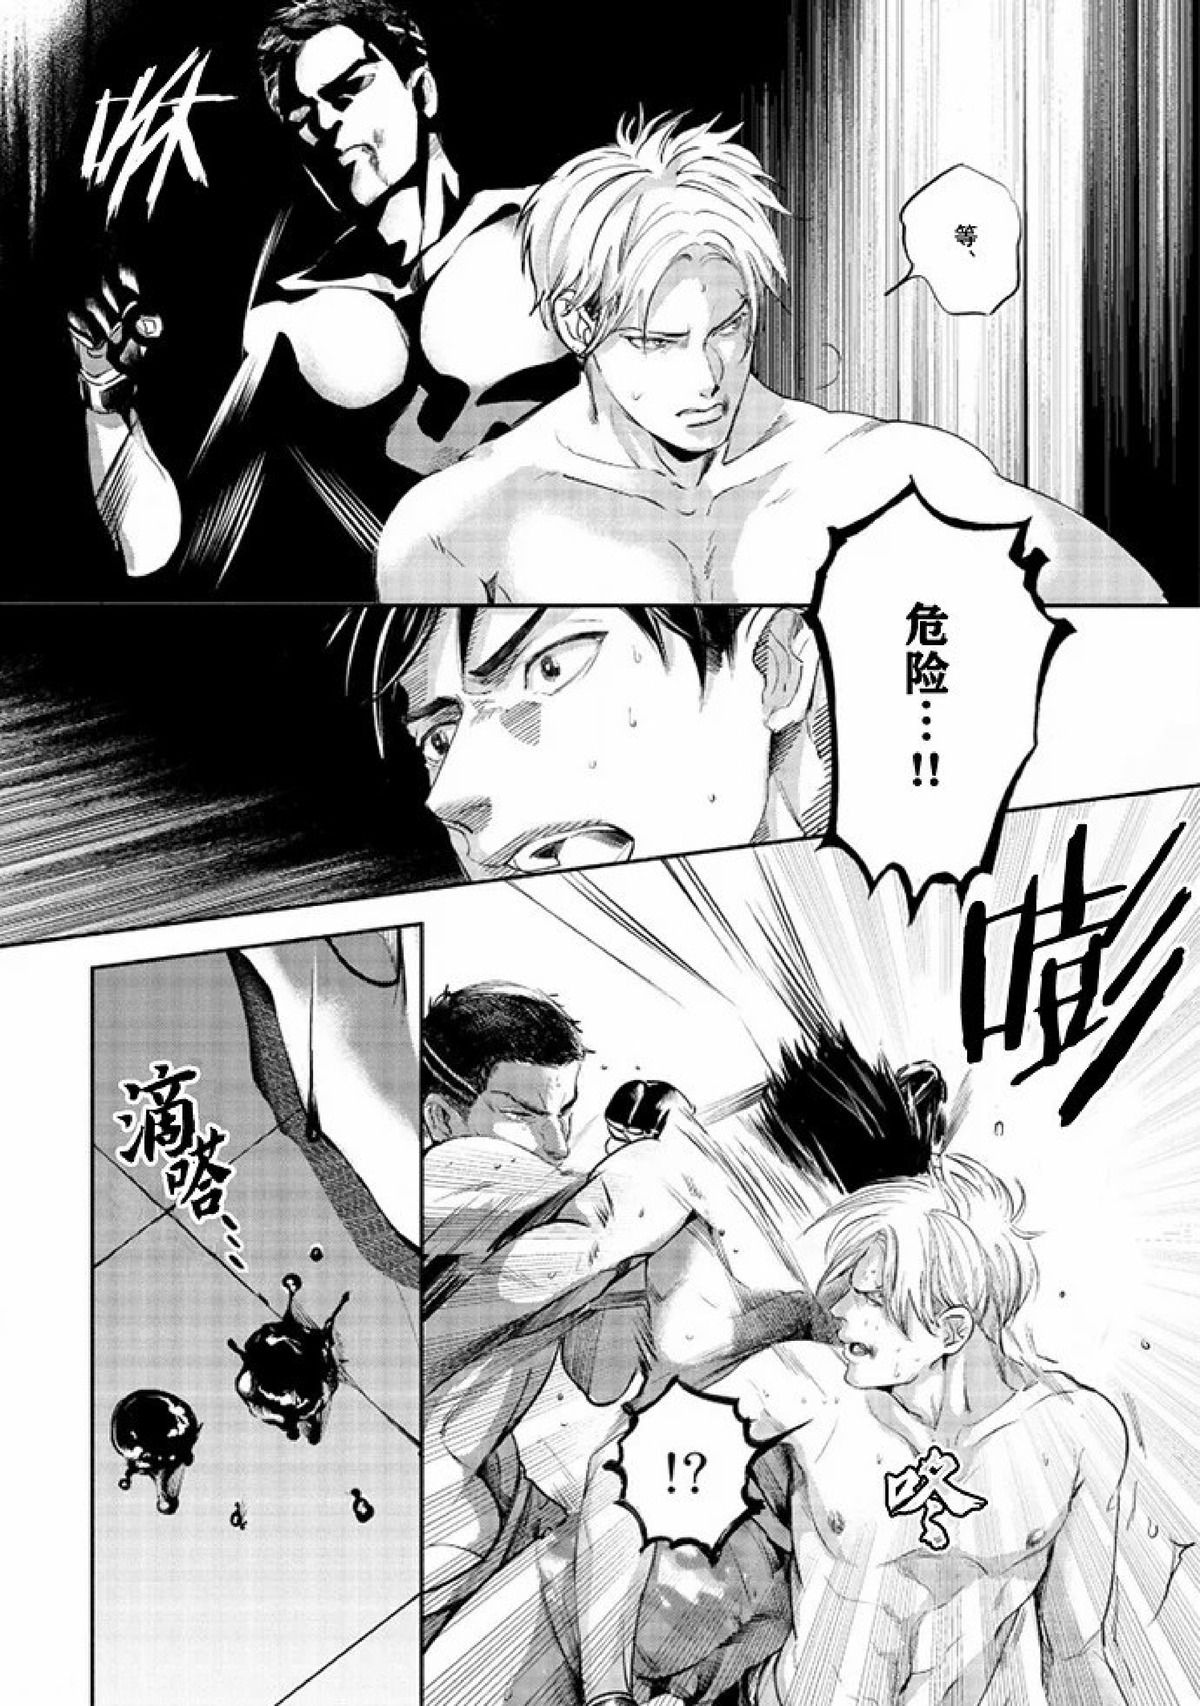 【Two sides of the same coin[腐漫]】漫画-（上卷01-02）章节漫画下拉式图片-68.jpg